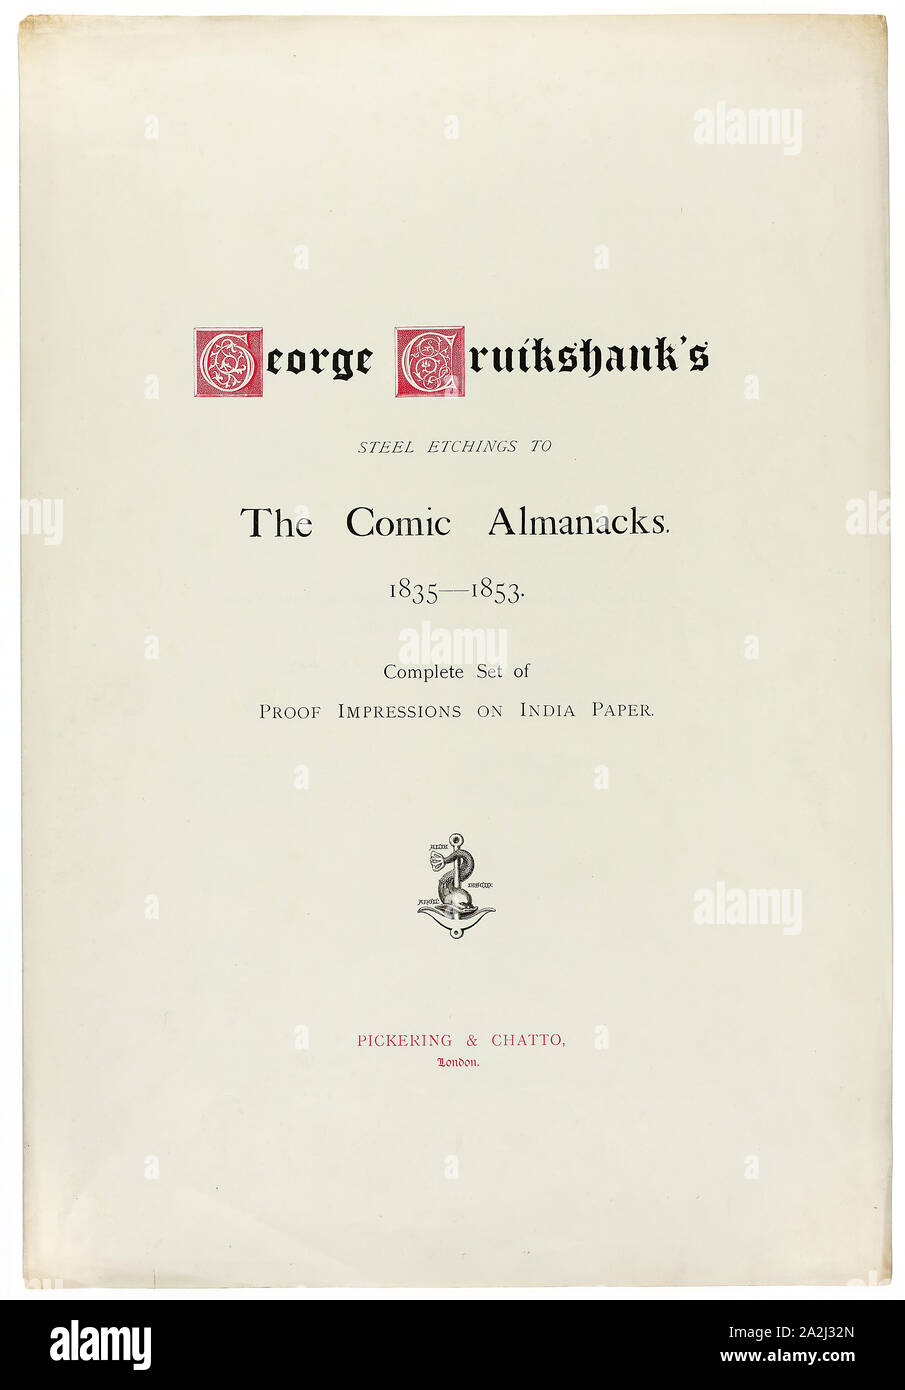 Title Page from George Cruikshank’s Steel Etchings to The Comic Almanacks: 1835-1853, c. 1880, George Cruikshank (English, 1792-1878), published by Pickering & Chatto (English, 19th century), England, Letterpress in red and black on cream wove paper, folded, 507 × 345 mm Stock Photo